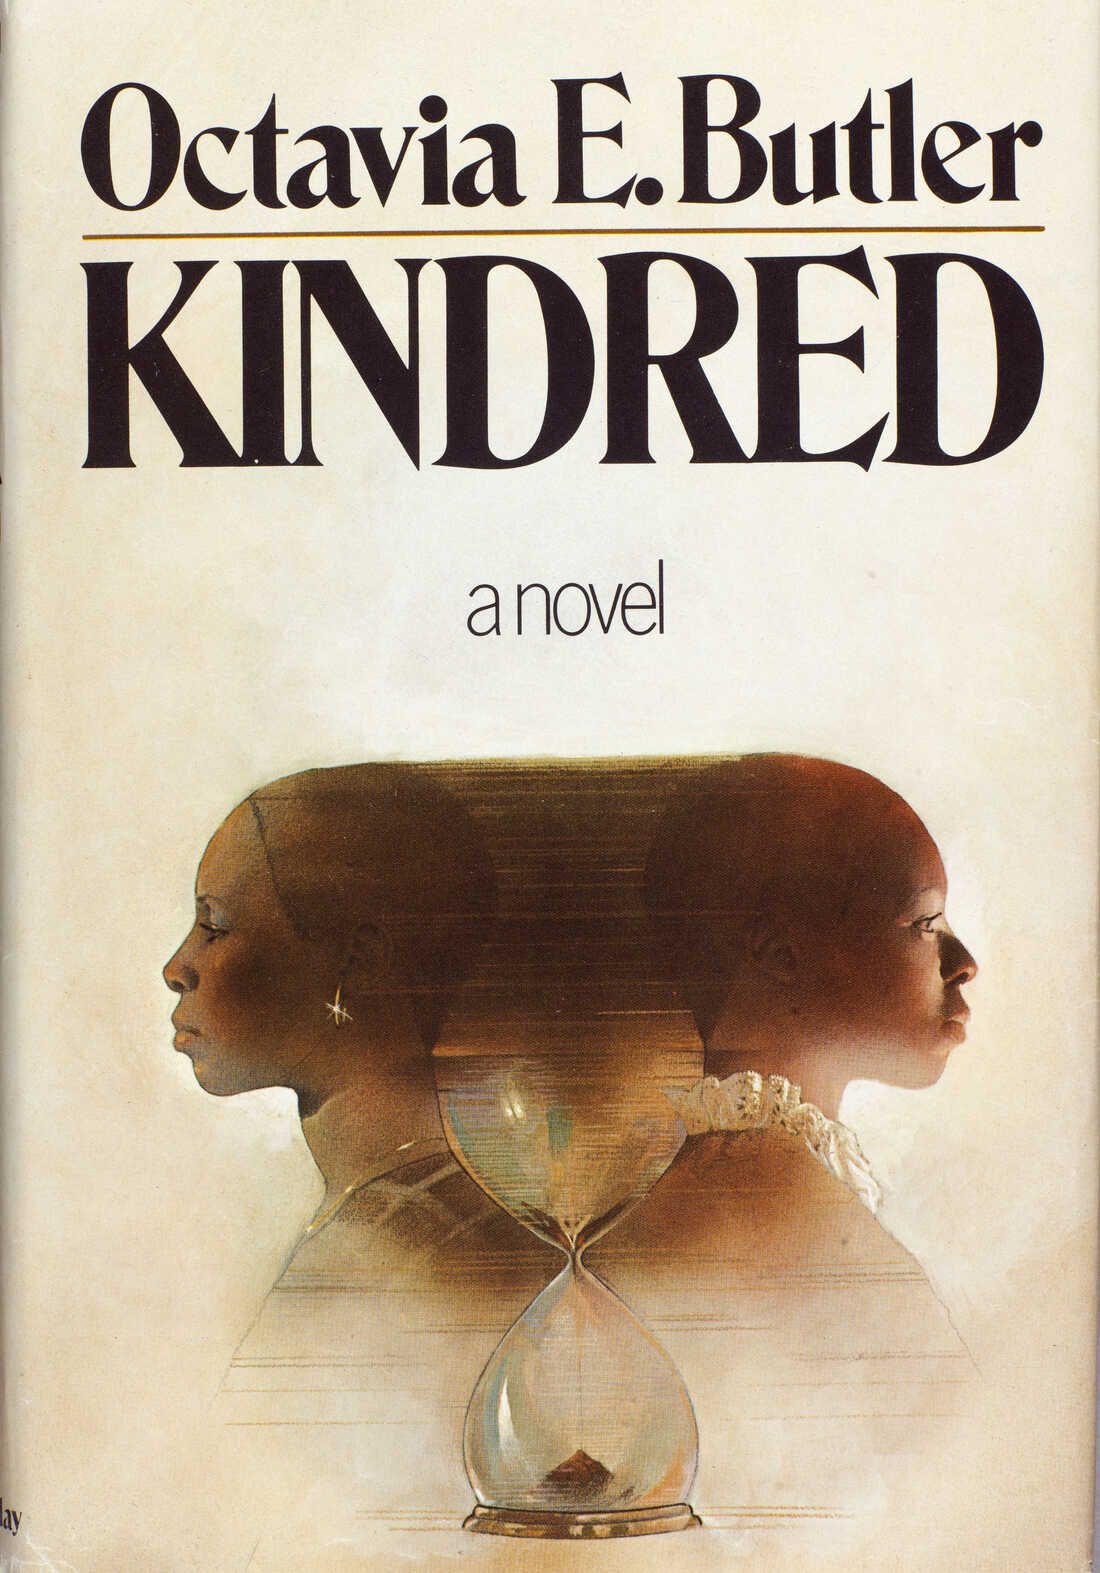 Two Black women stand with backs turned to each other fading into one another with an hourglass between them on the cover of Octavia Butler’s Kindred